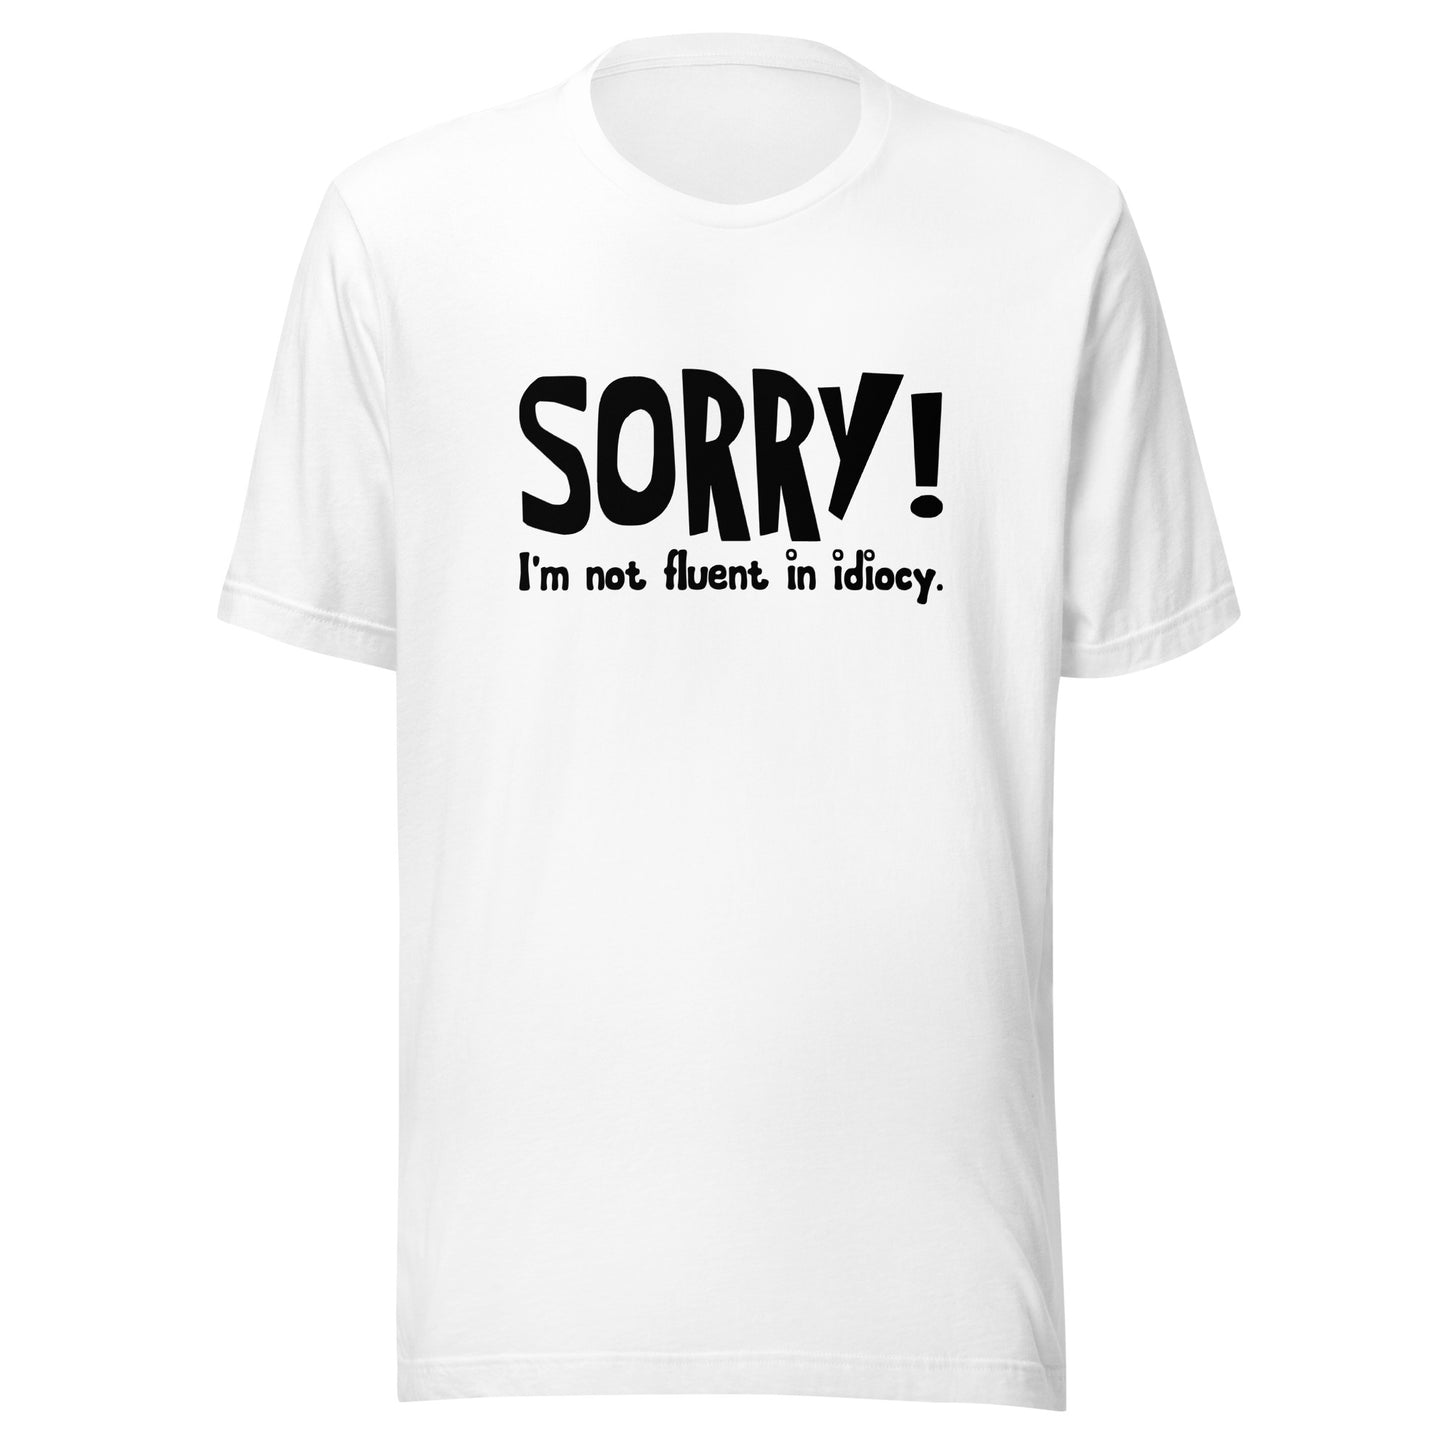 Sorry! I'm not fluent in idiocy T-shirt